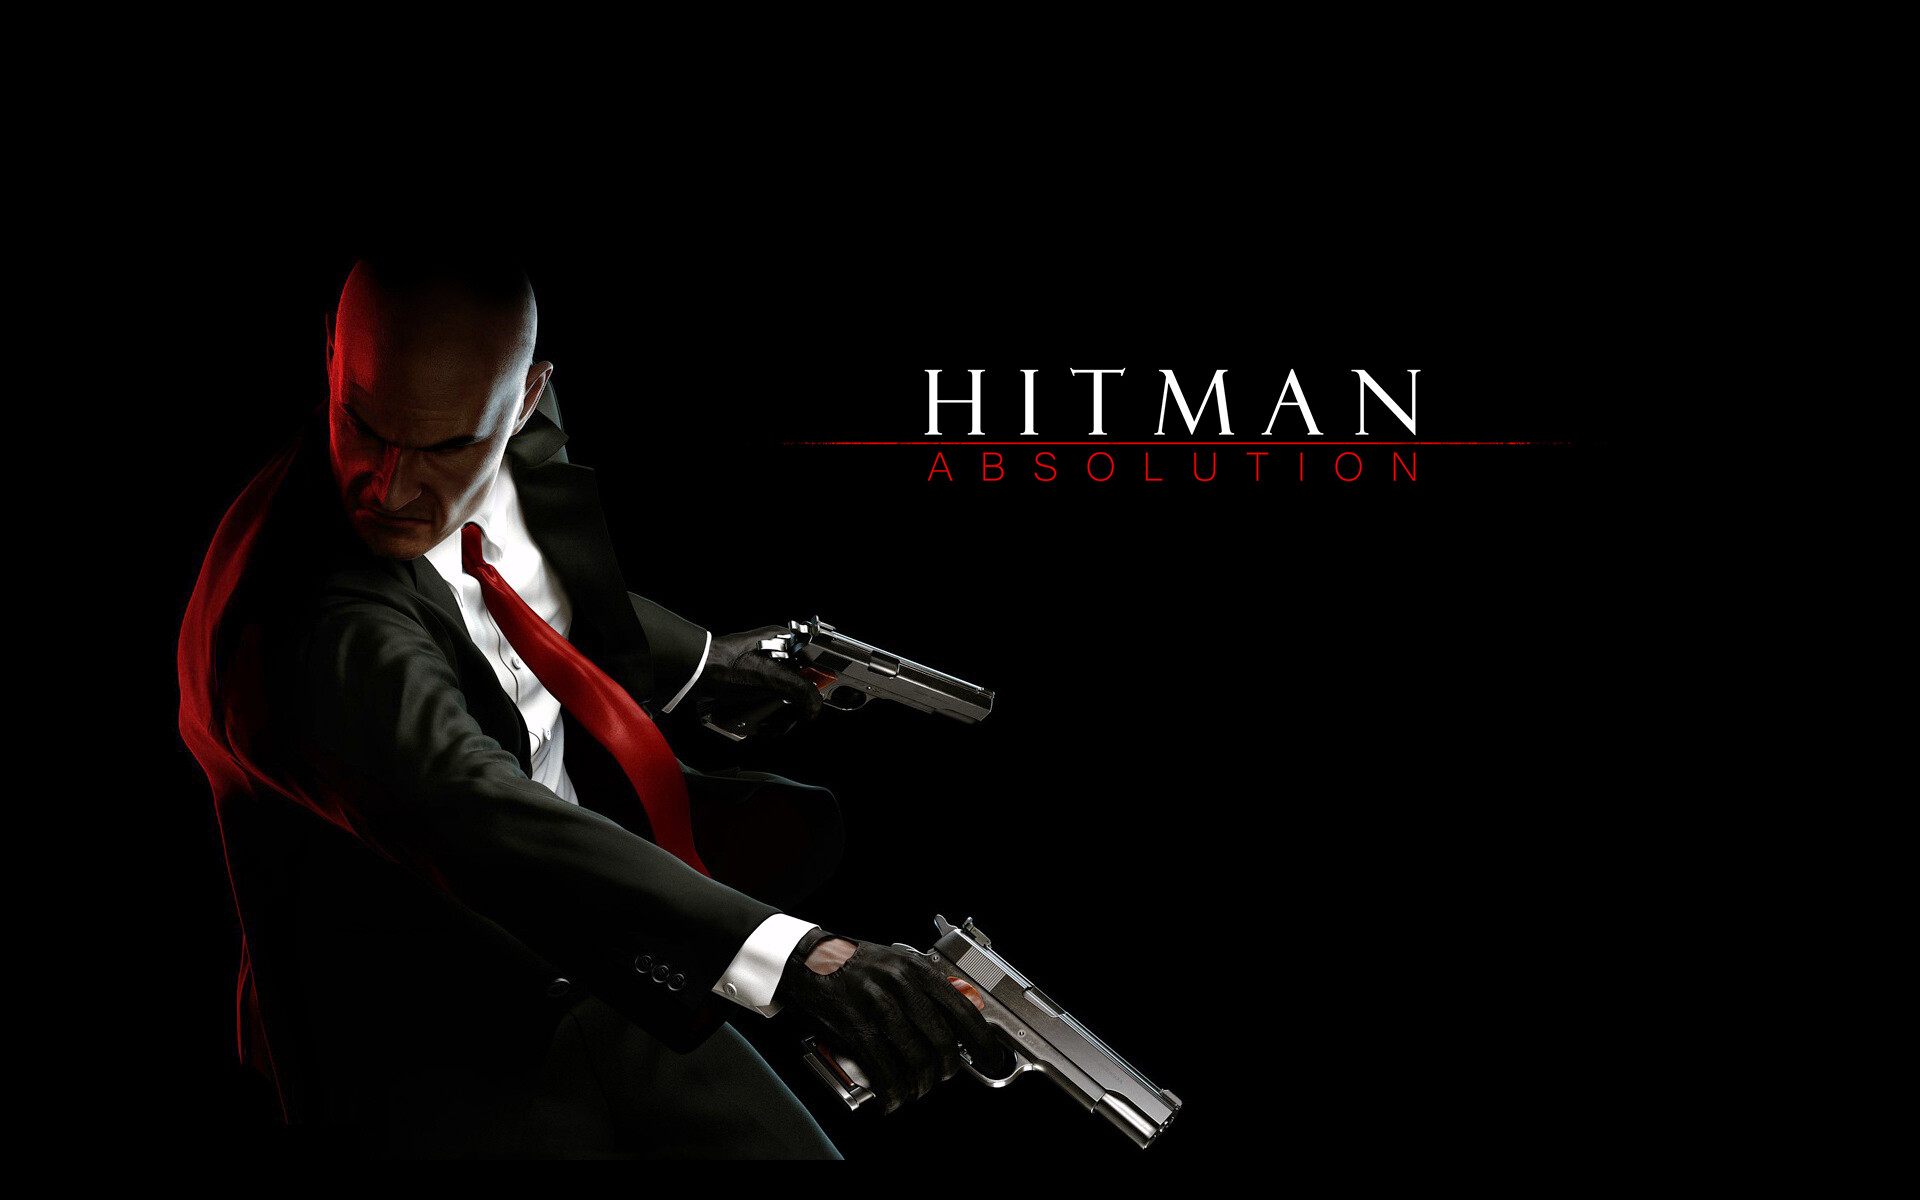 Hitman (Game): Gameplay, Agent 47, a cold-blooded assassin, who takes on his most dangerous contract to date, Absolution. 1920x1200 HD Background.